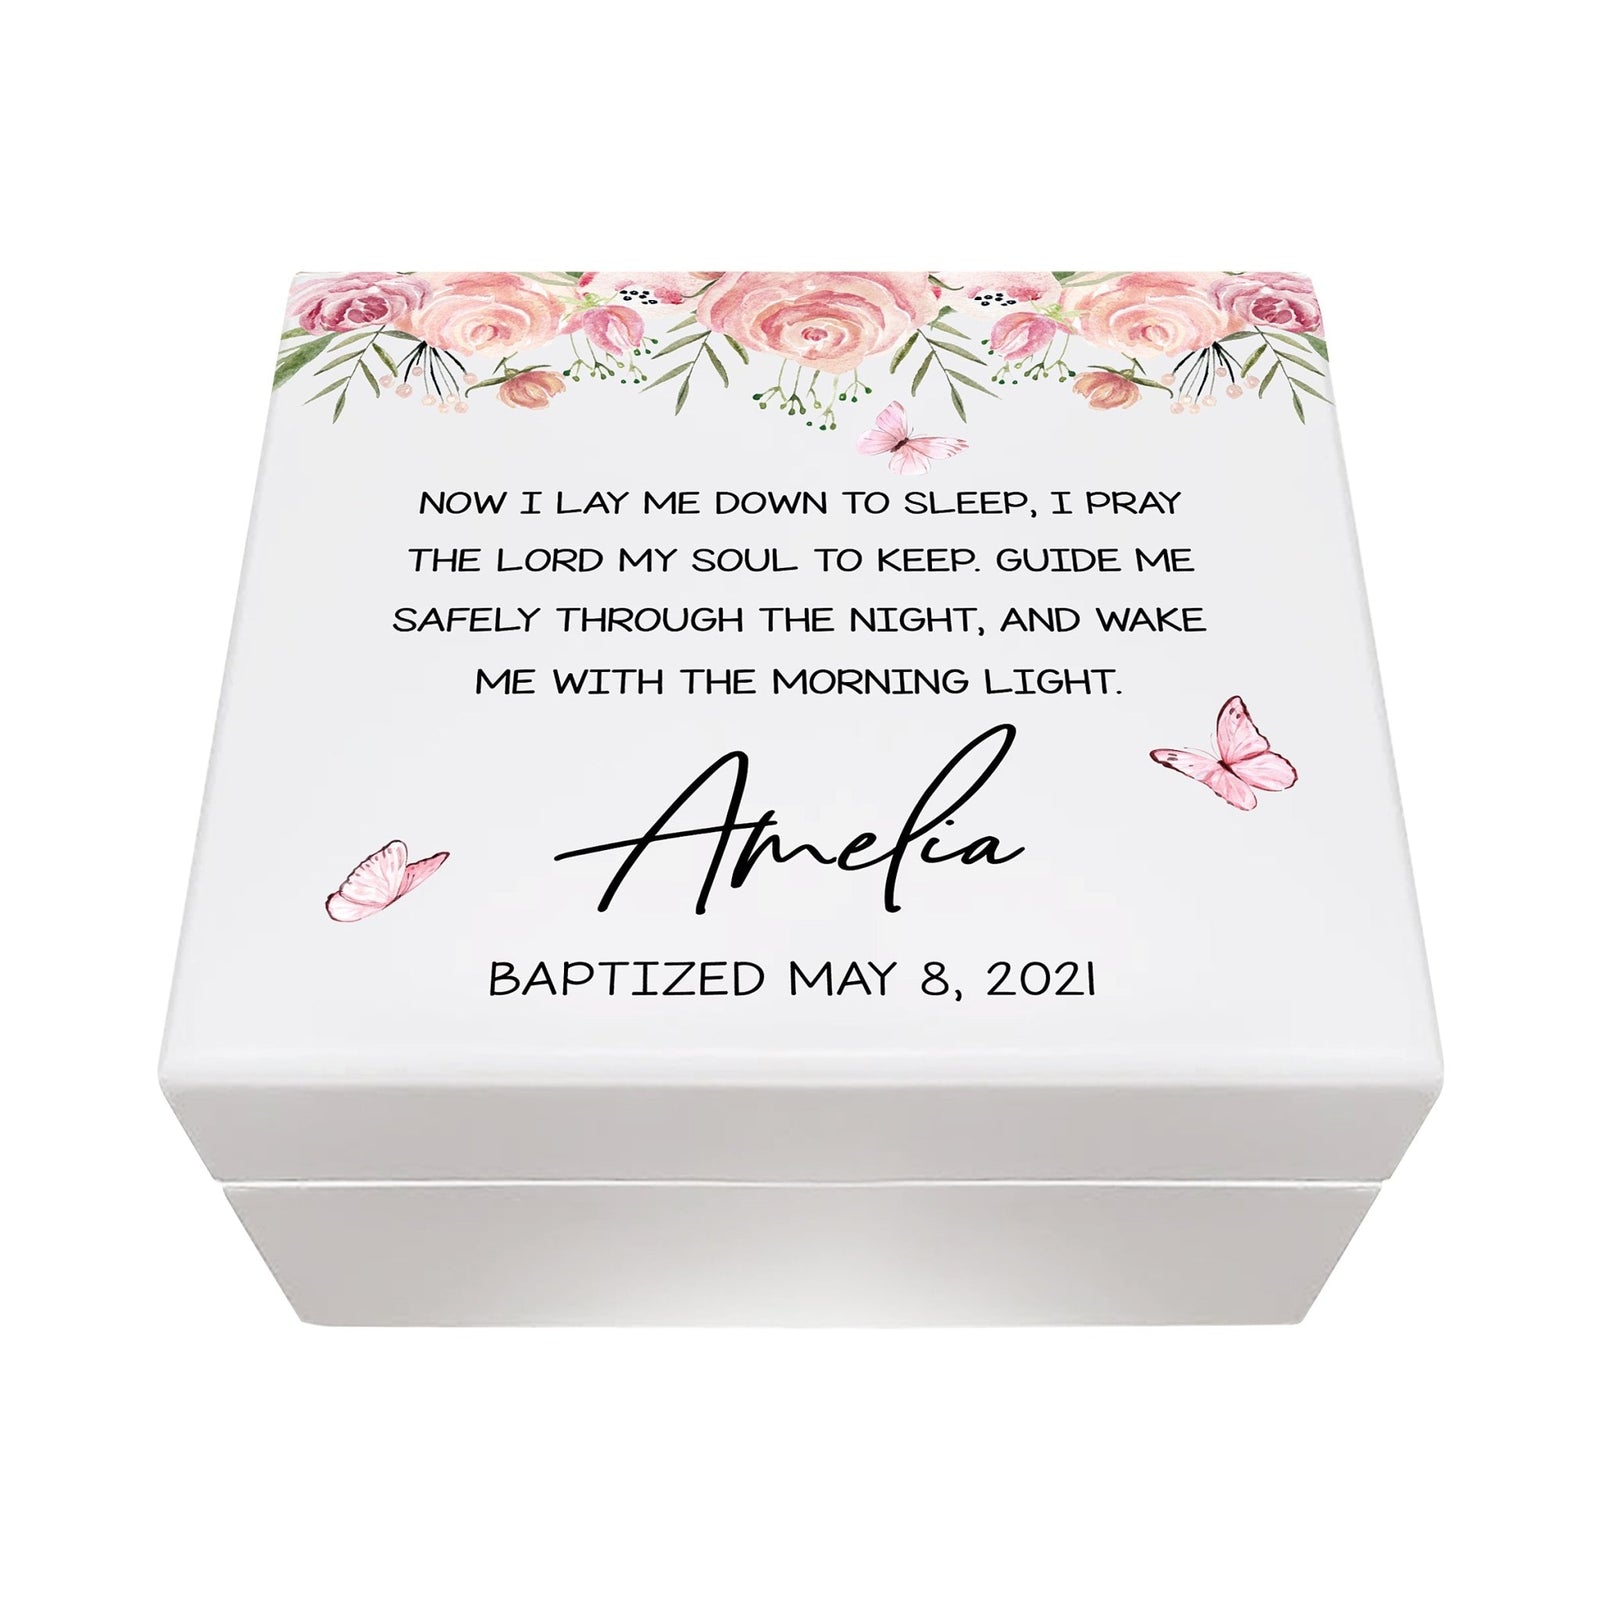 Personalized Baptism Jewelry Box - Lay Me Down - LifeSong Milestones